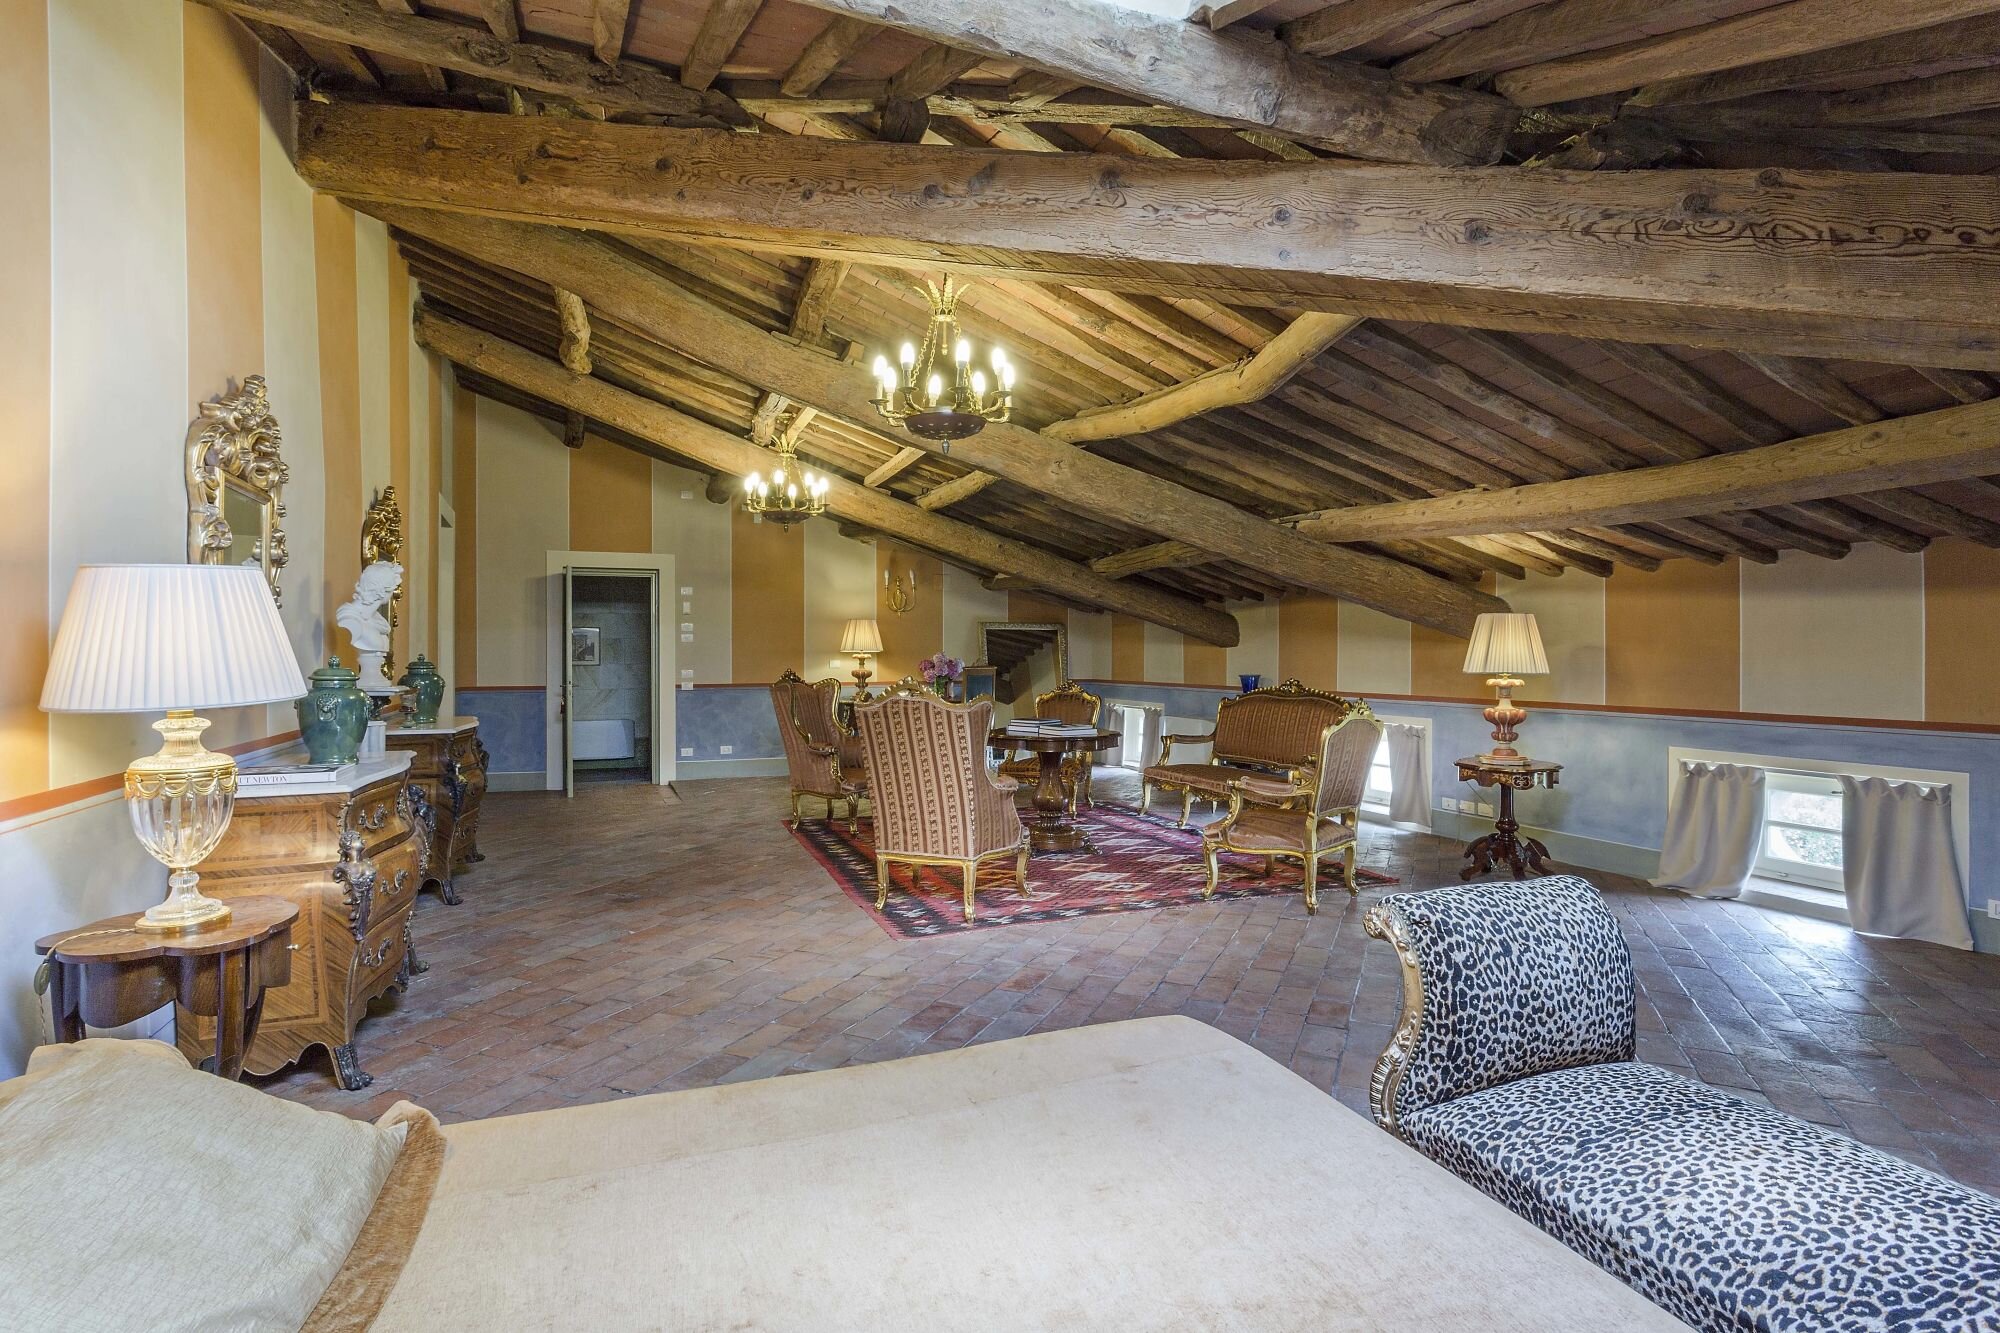 Francis York A Portfolio of Luxury Tuscan Villa Rentals is Coming to Auction33.jpeg